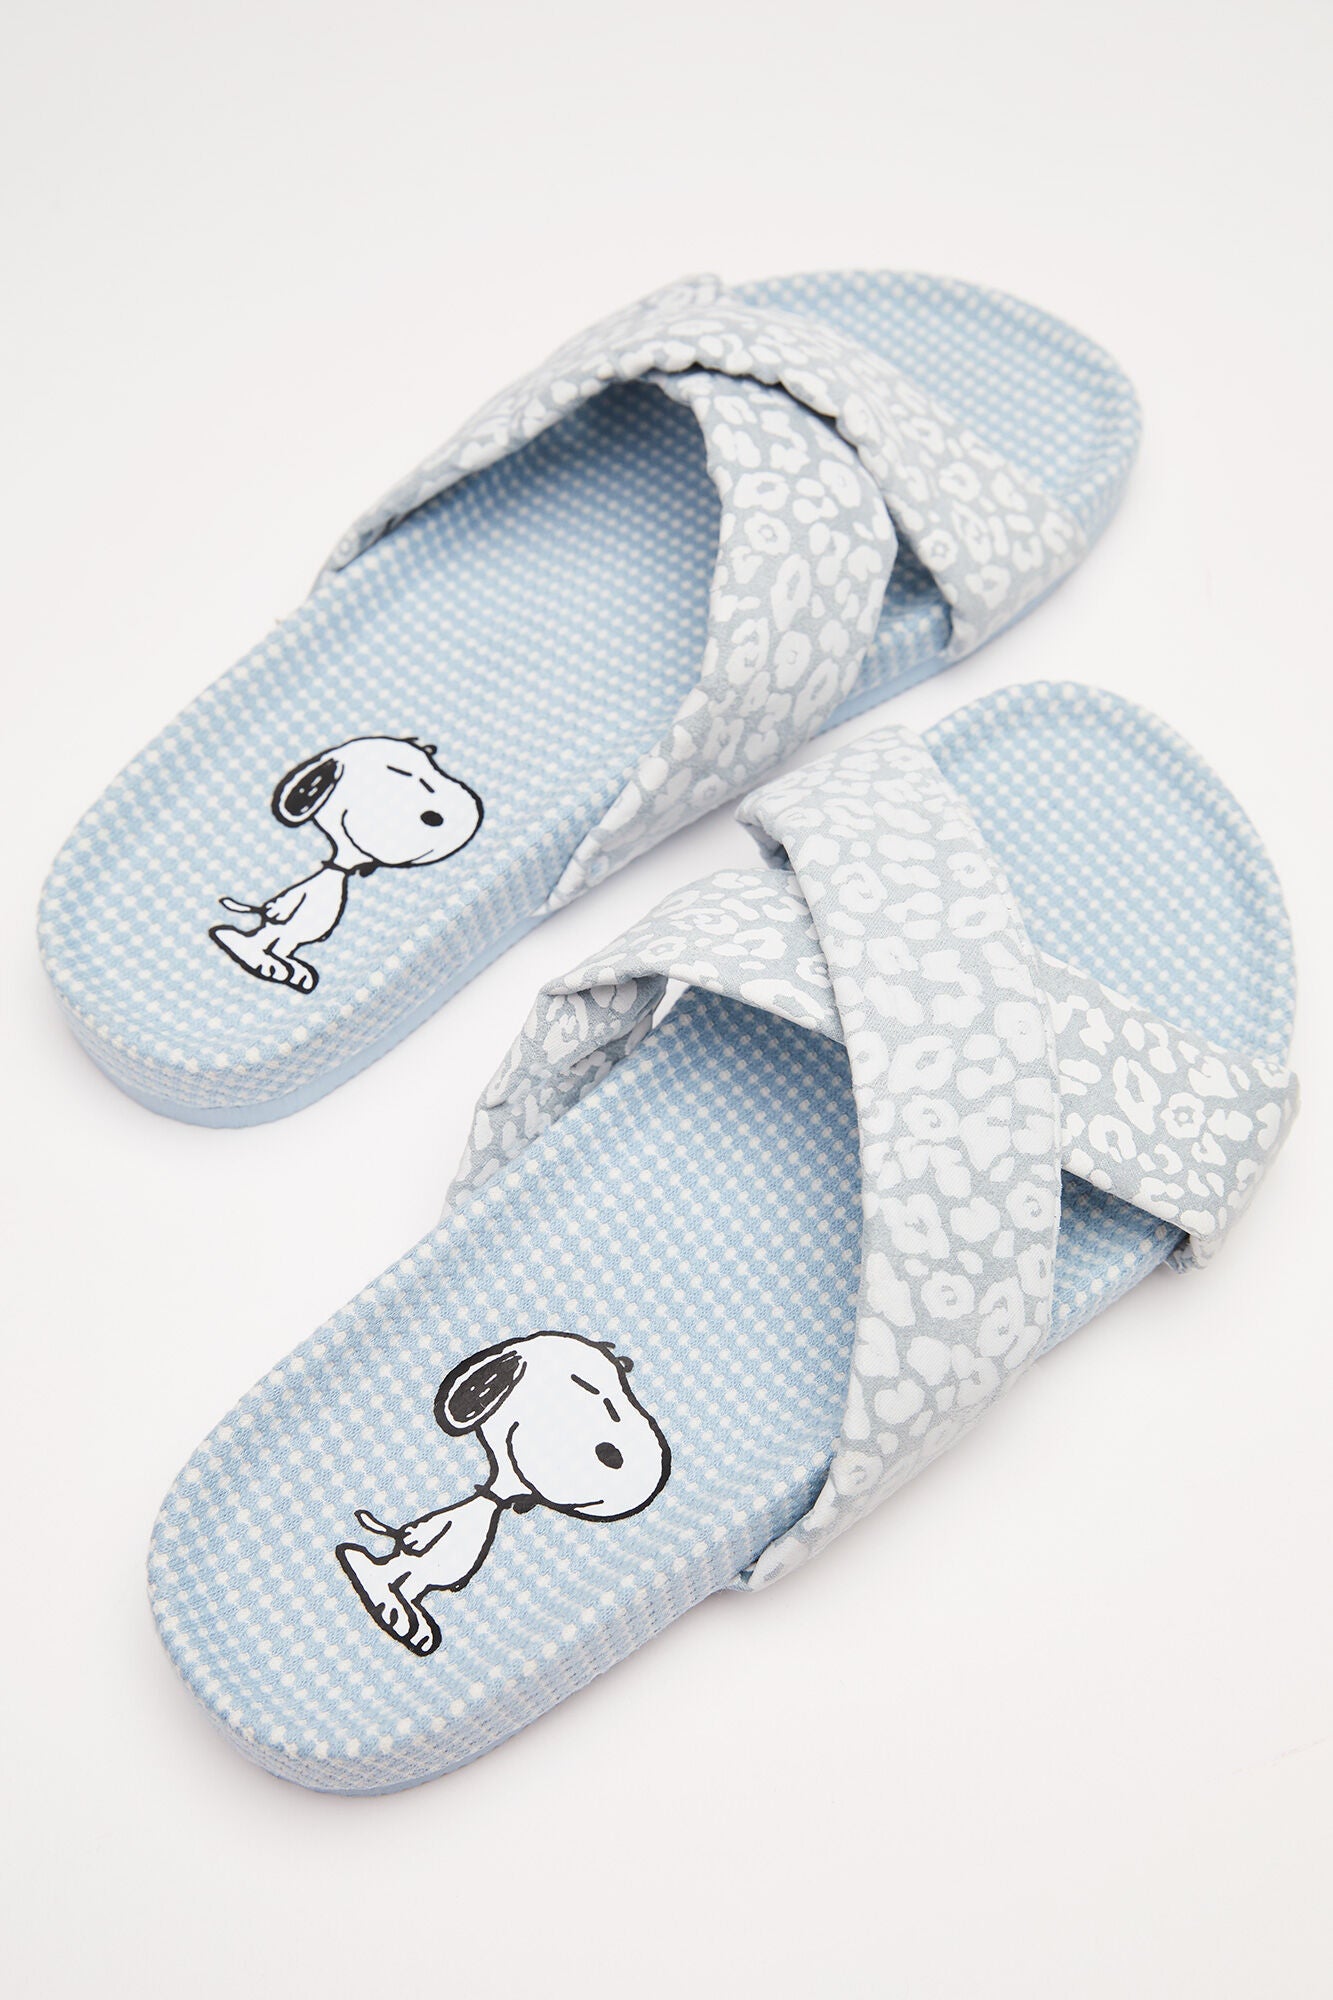 Open shoes with Snoopy print